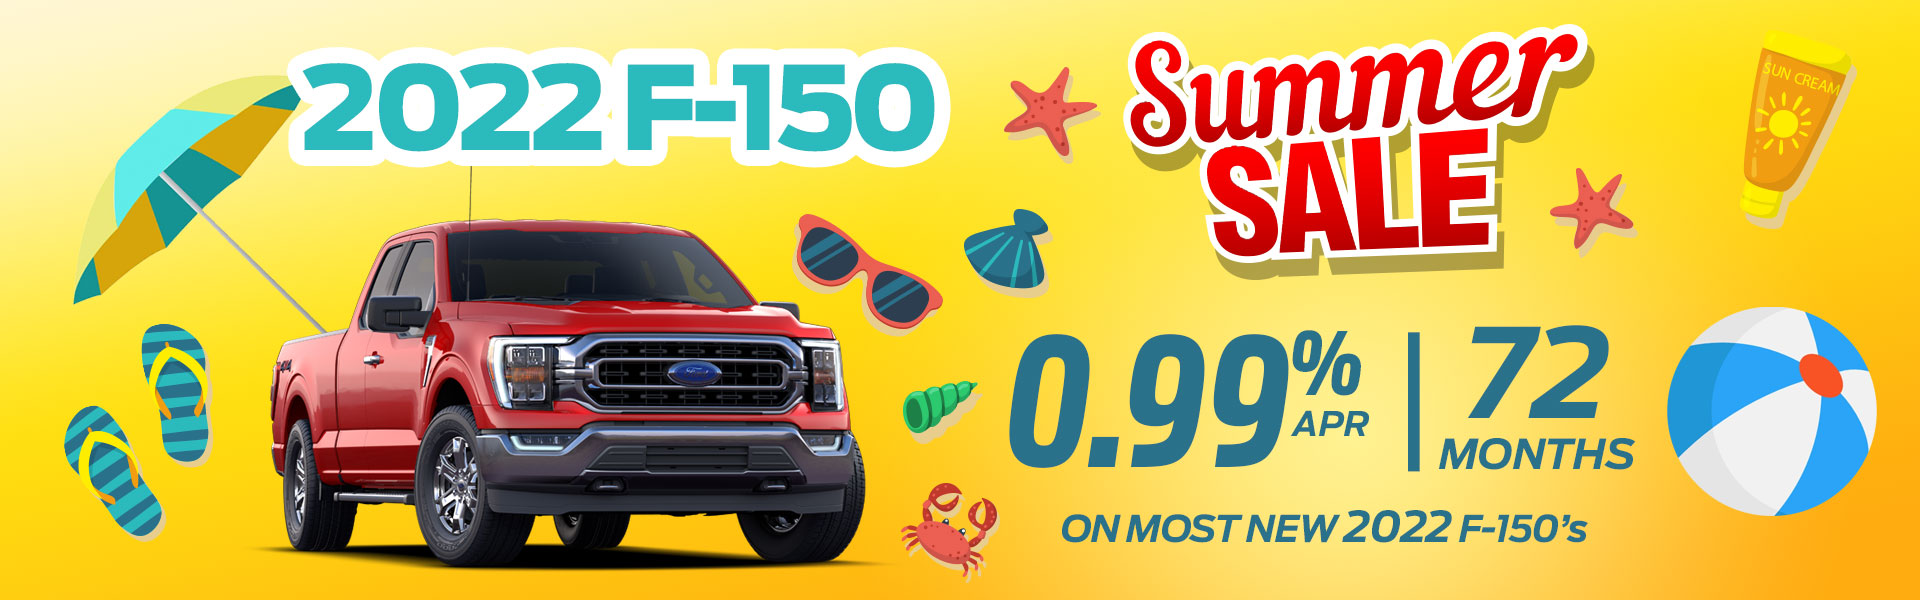 2022 Ford F-150 Summer Sales Event